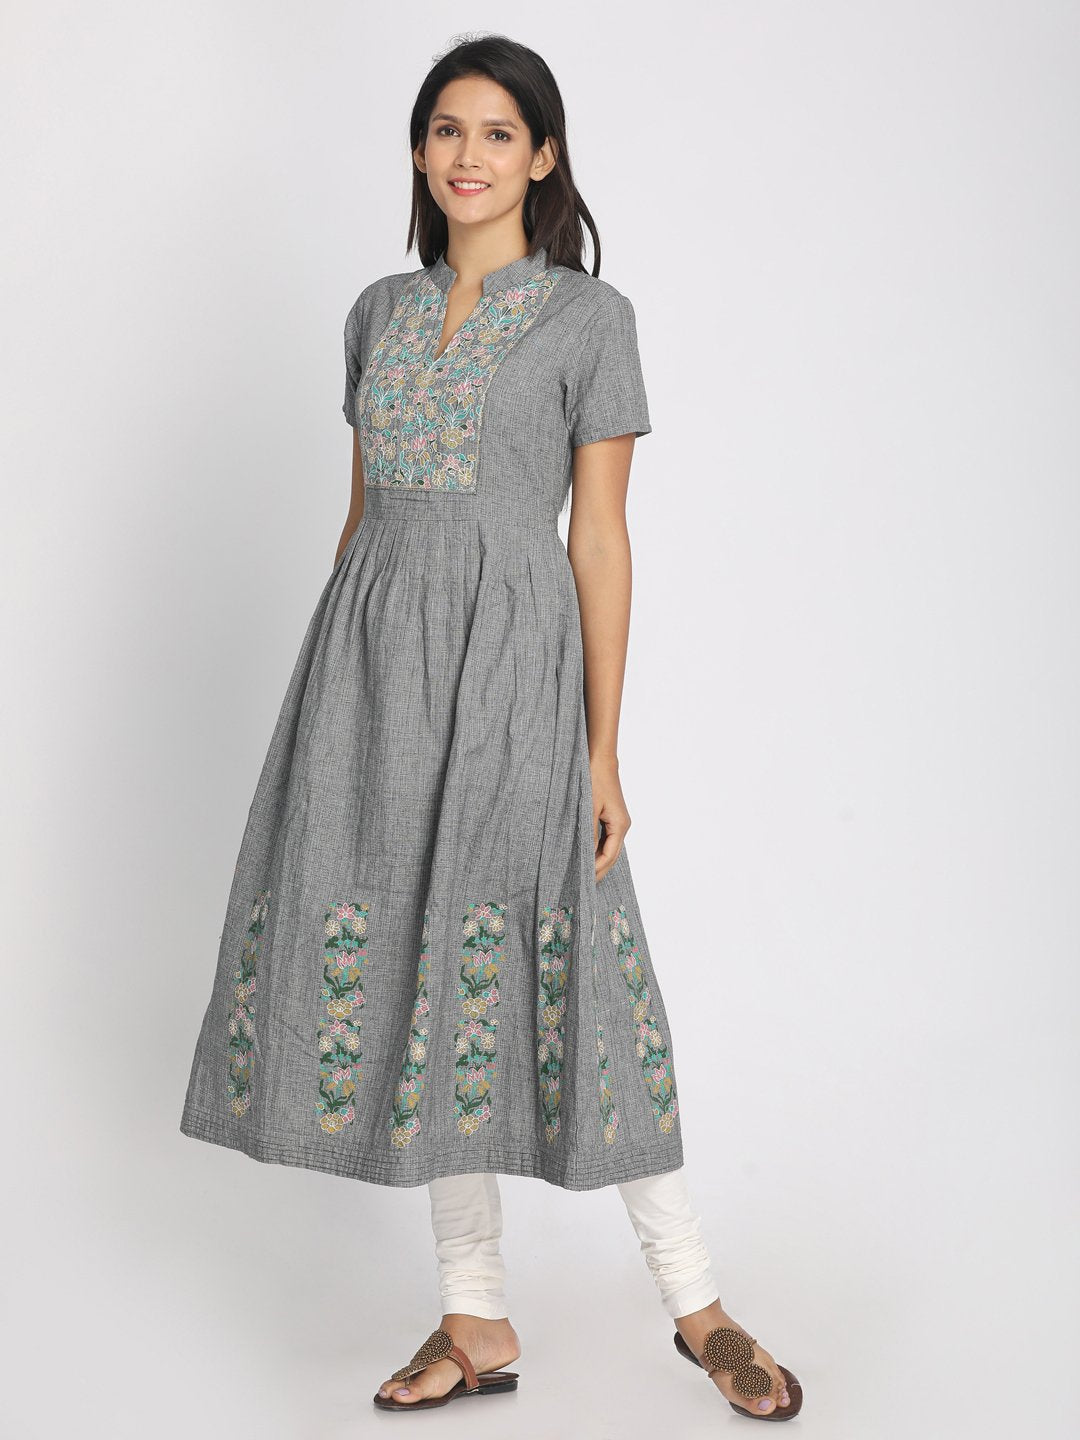 Block Printed and Embroidered Grey Maxi Dress With Mask